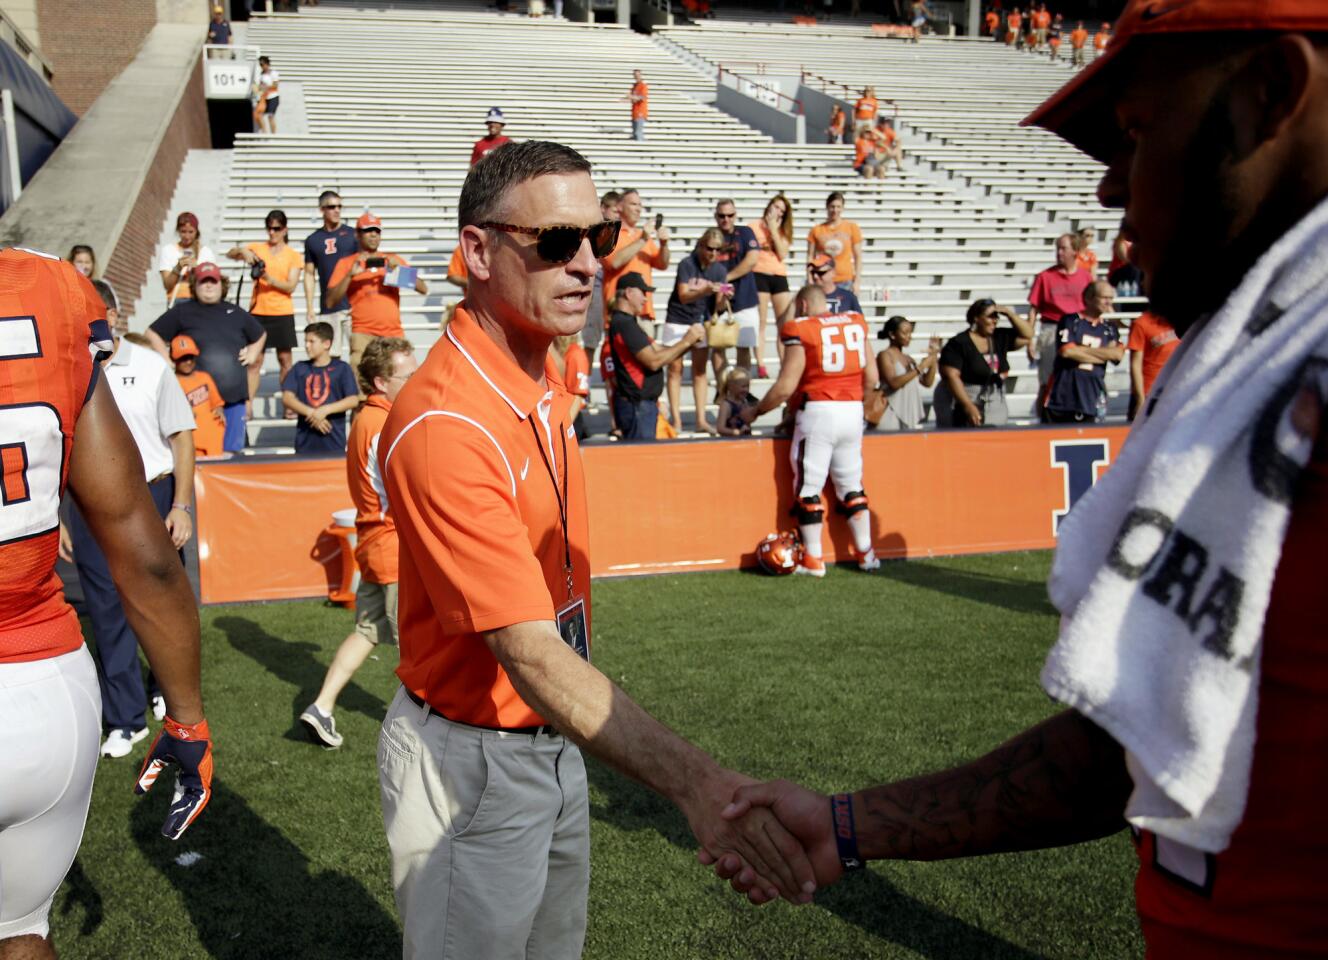 Athletic director Mike Thomas congratulates players after a game in Champaign in October.